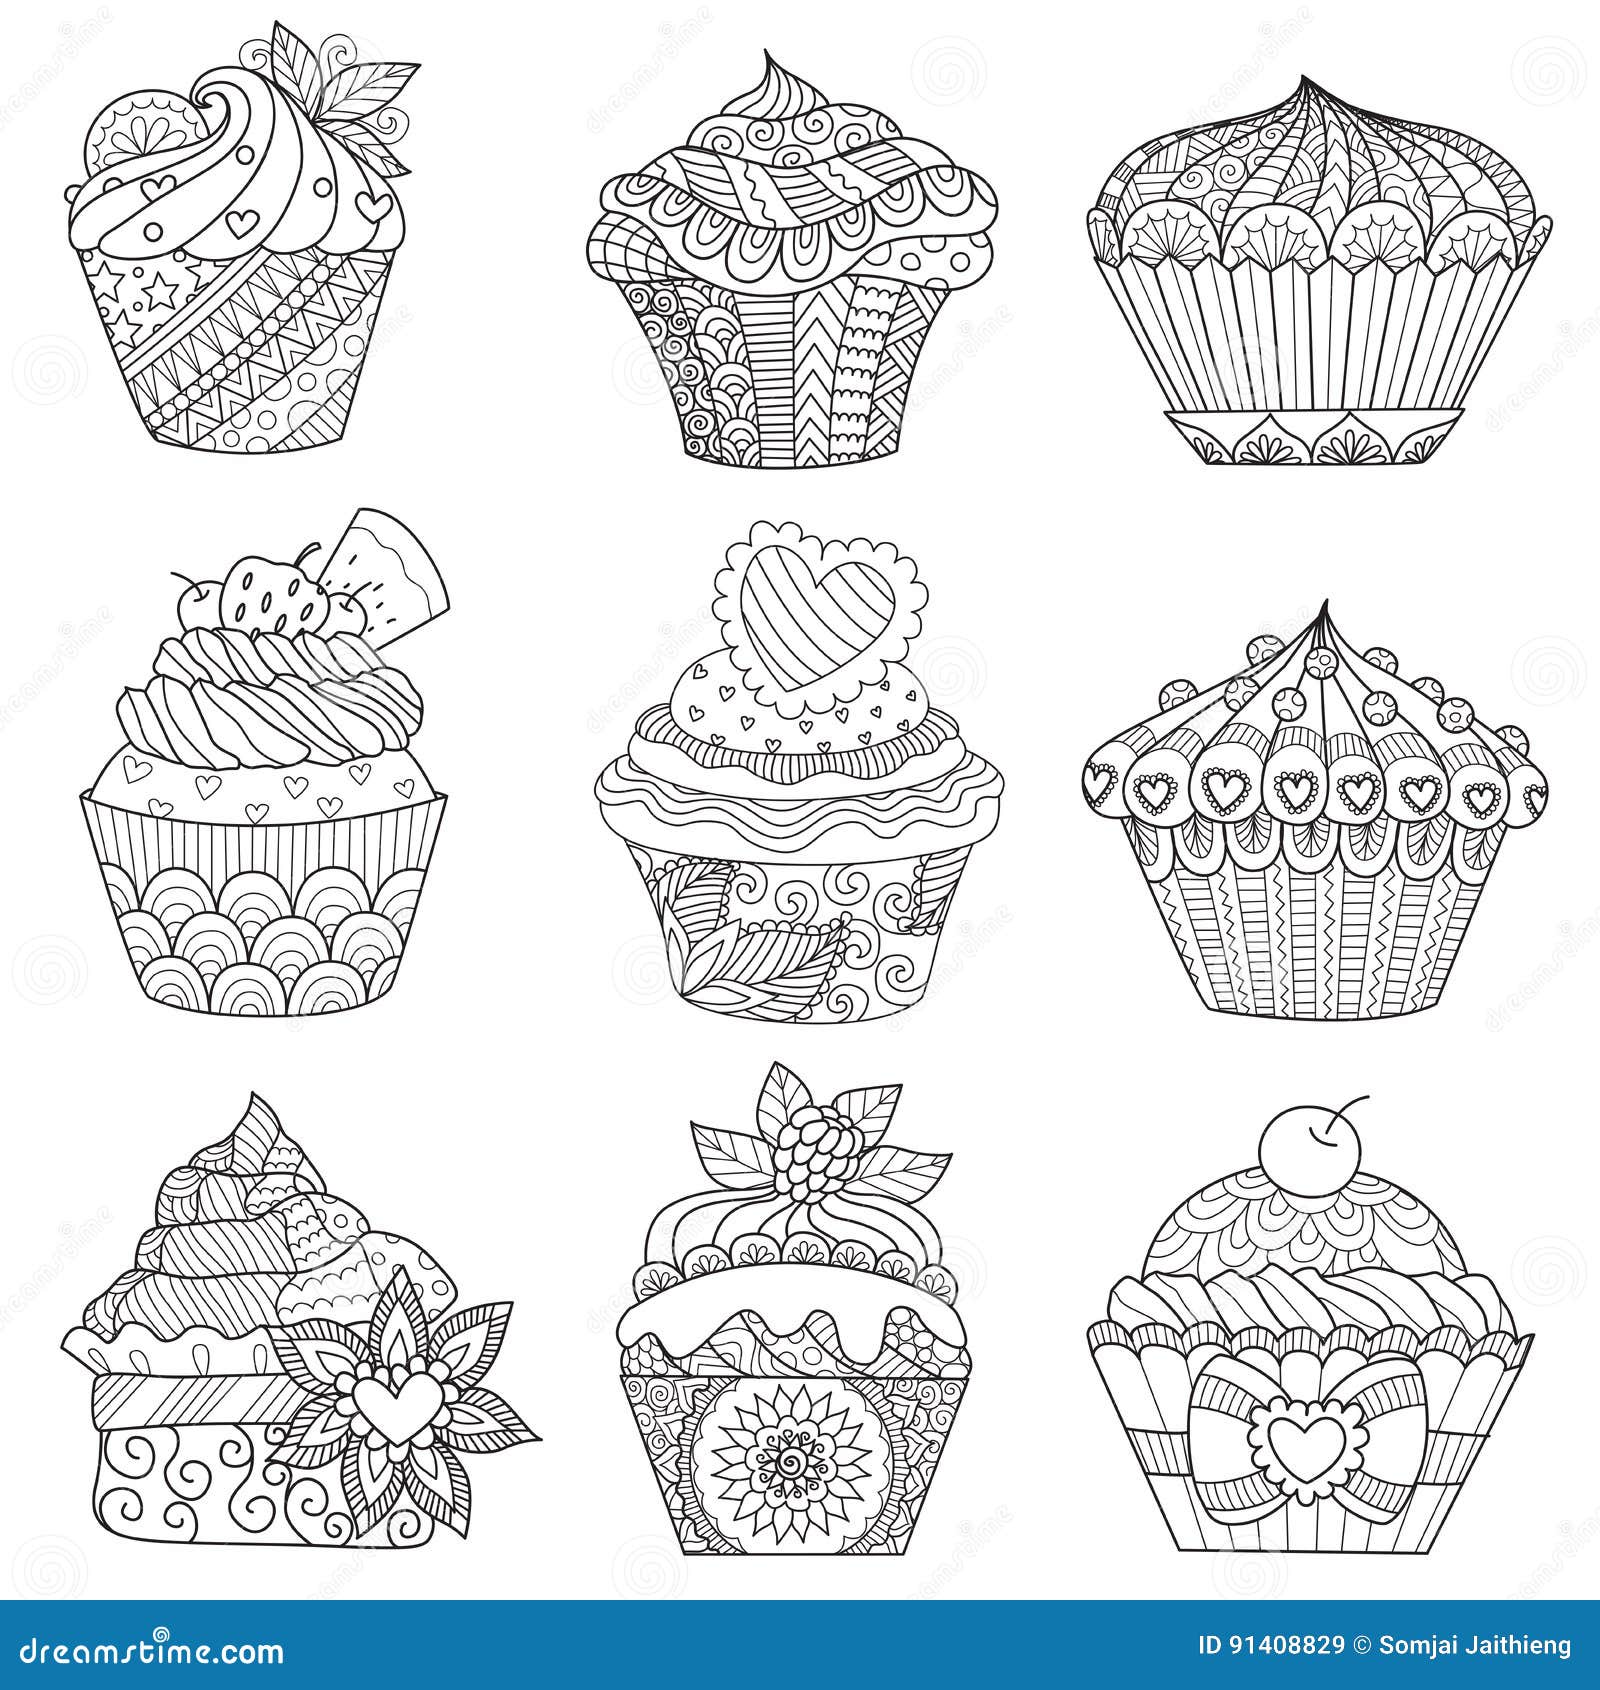 nine zendoodle  of cupcakes  on white background  for both kids and adult coloring book page.  illustrat